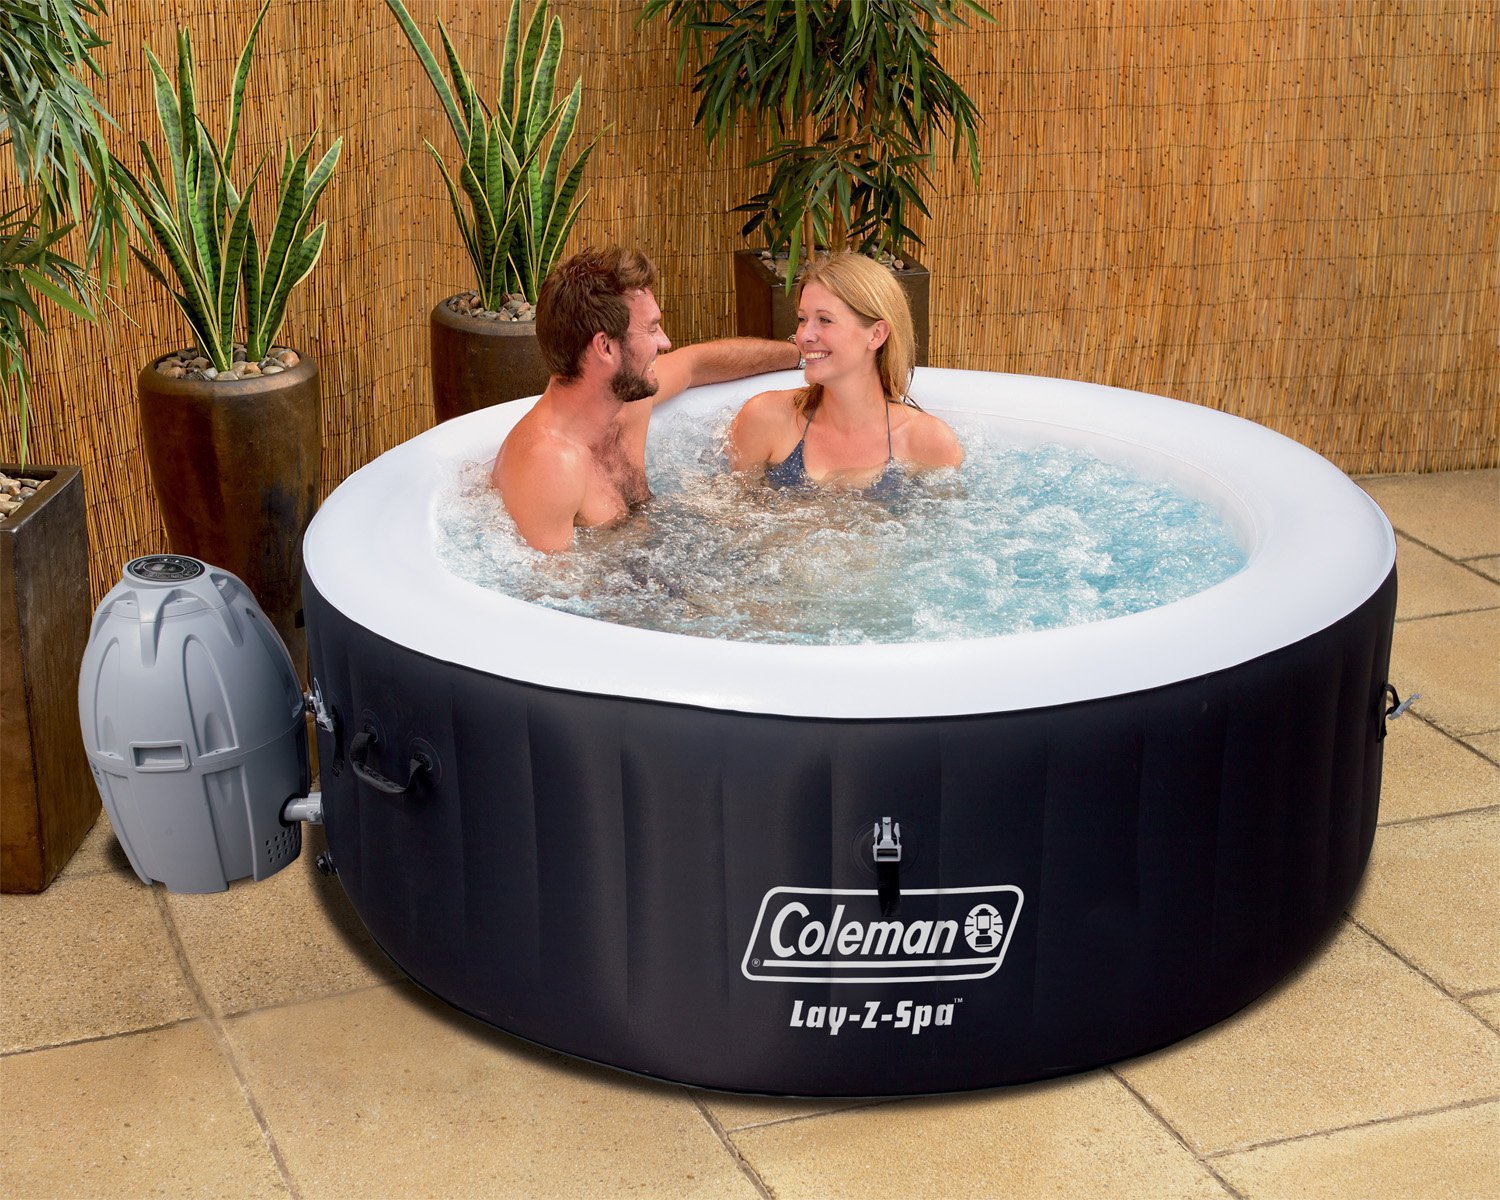 Inflatable Hot Tub In Living Room